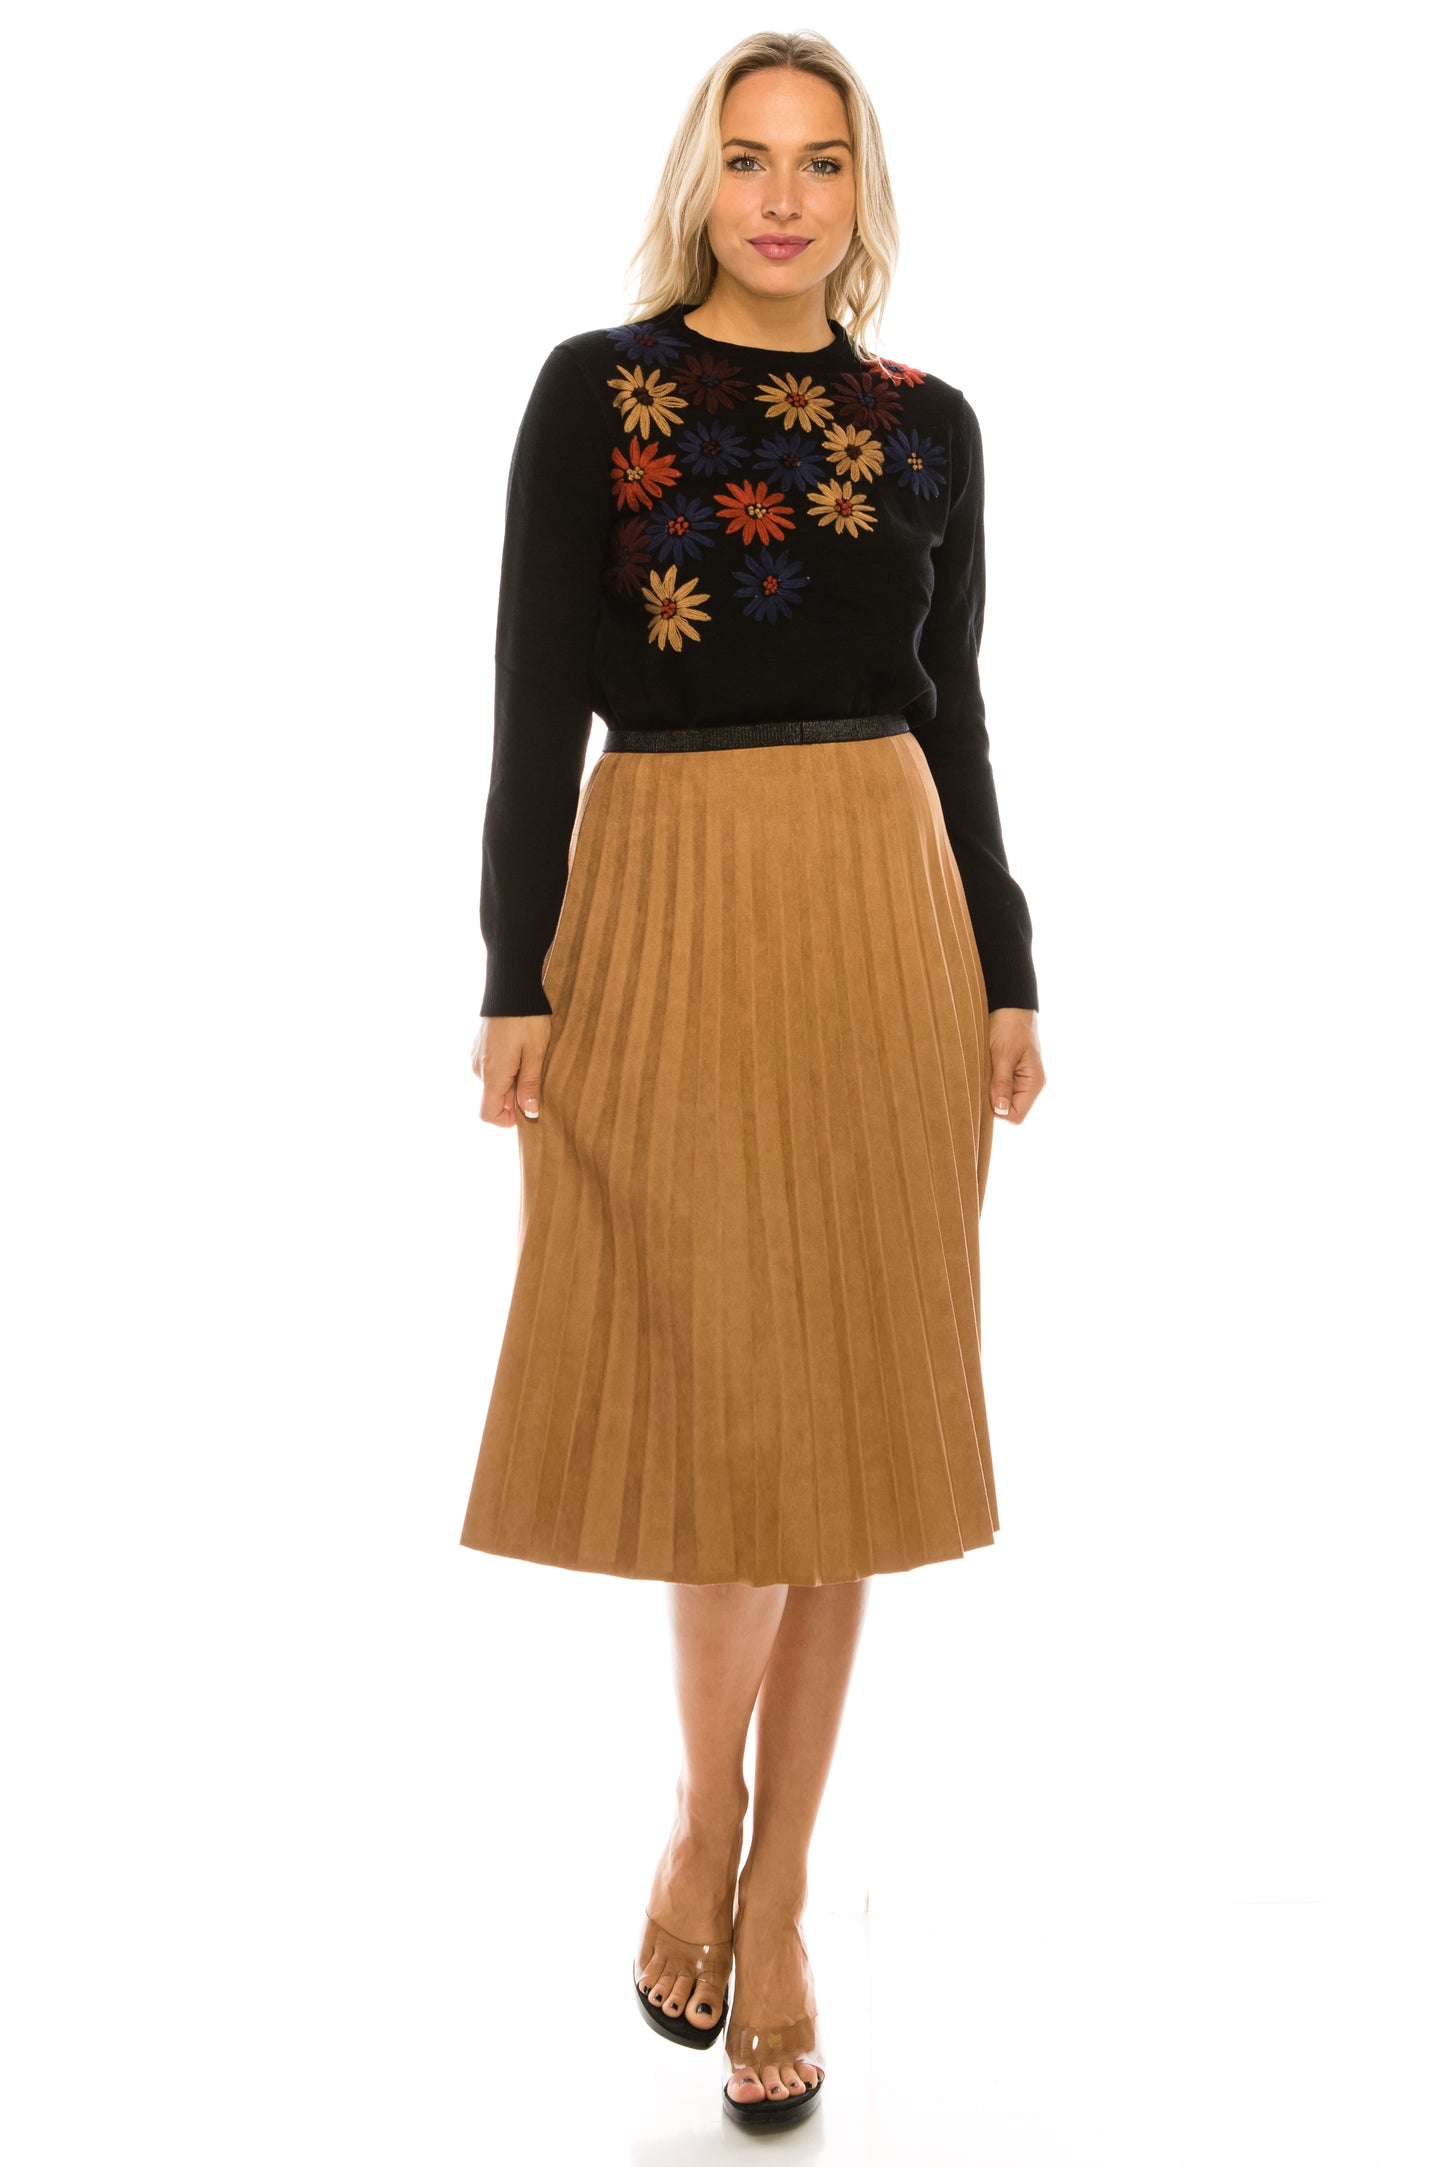 Camel Suede Pleated Skirt Shimmer Waist